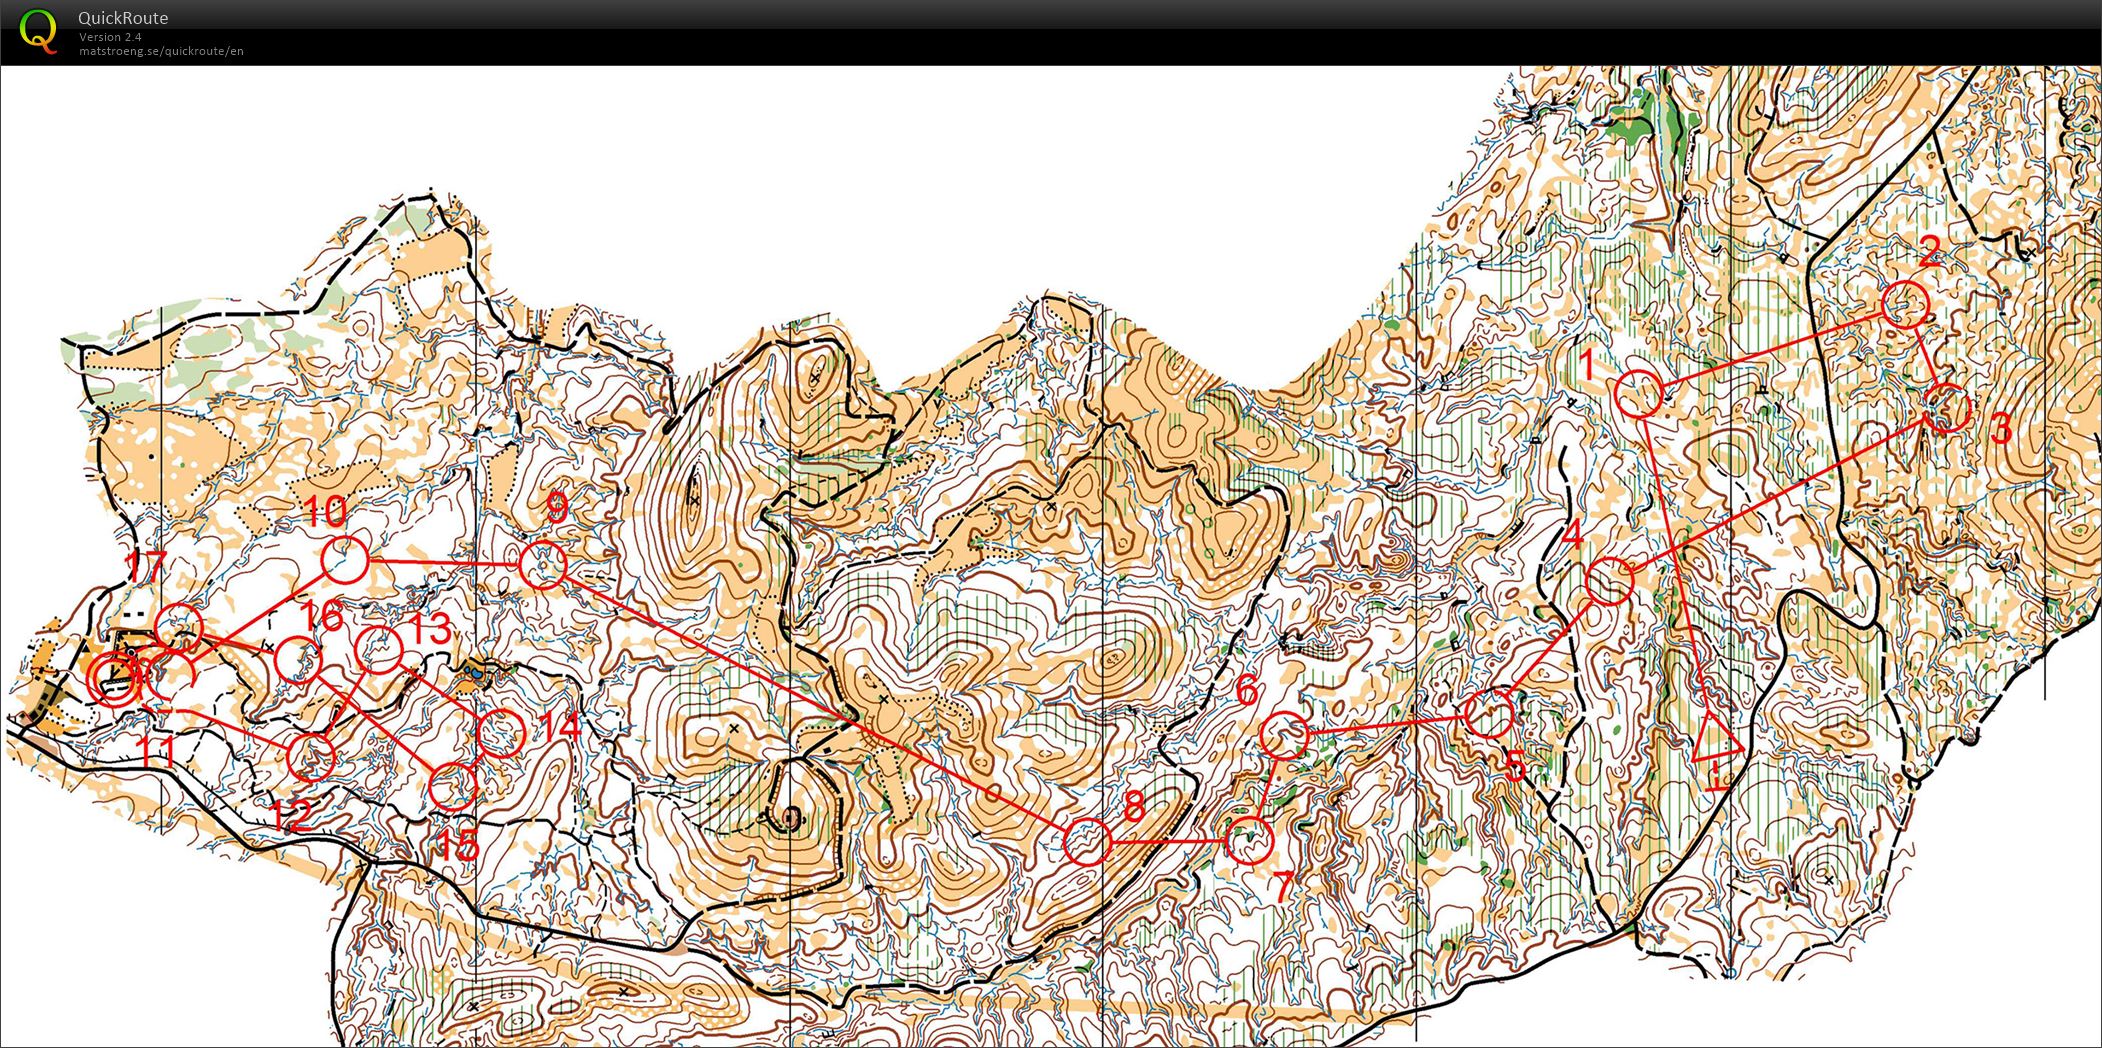 World Cup course W - middle  (31.12.2014)